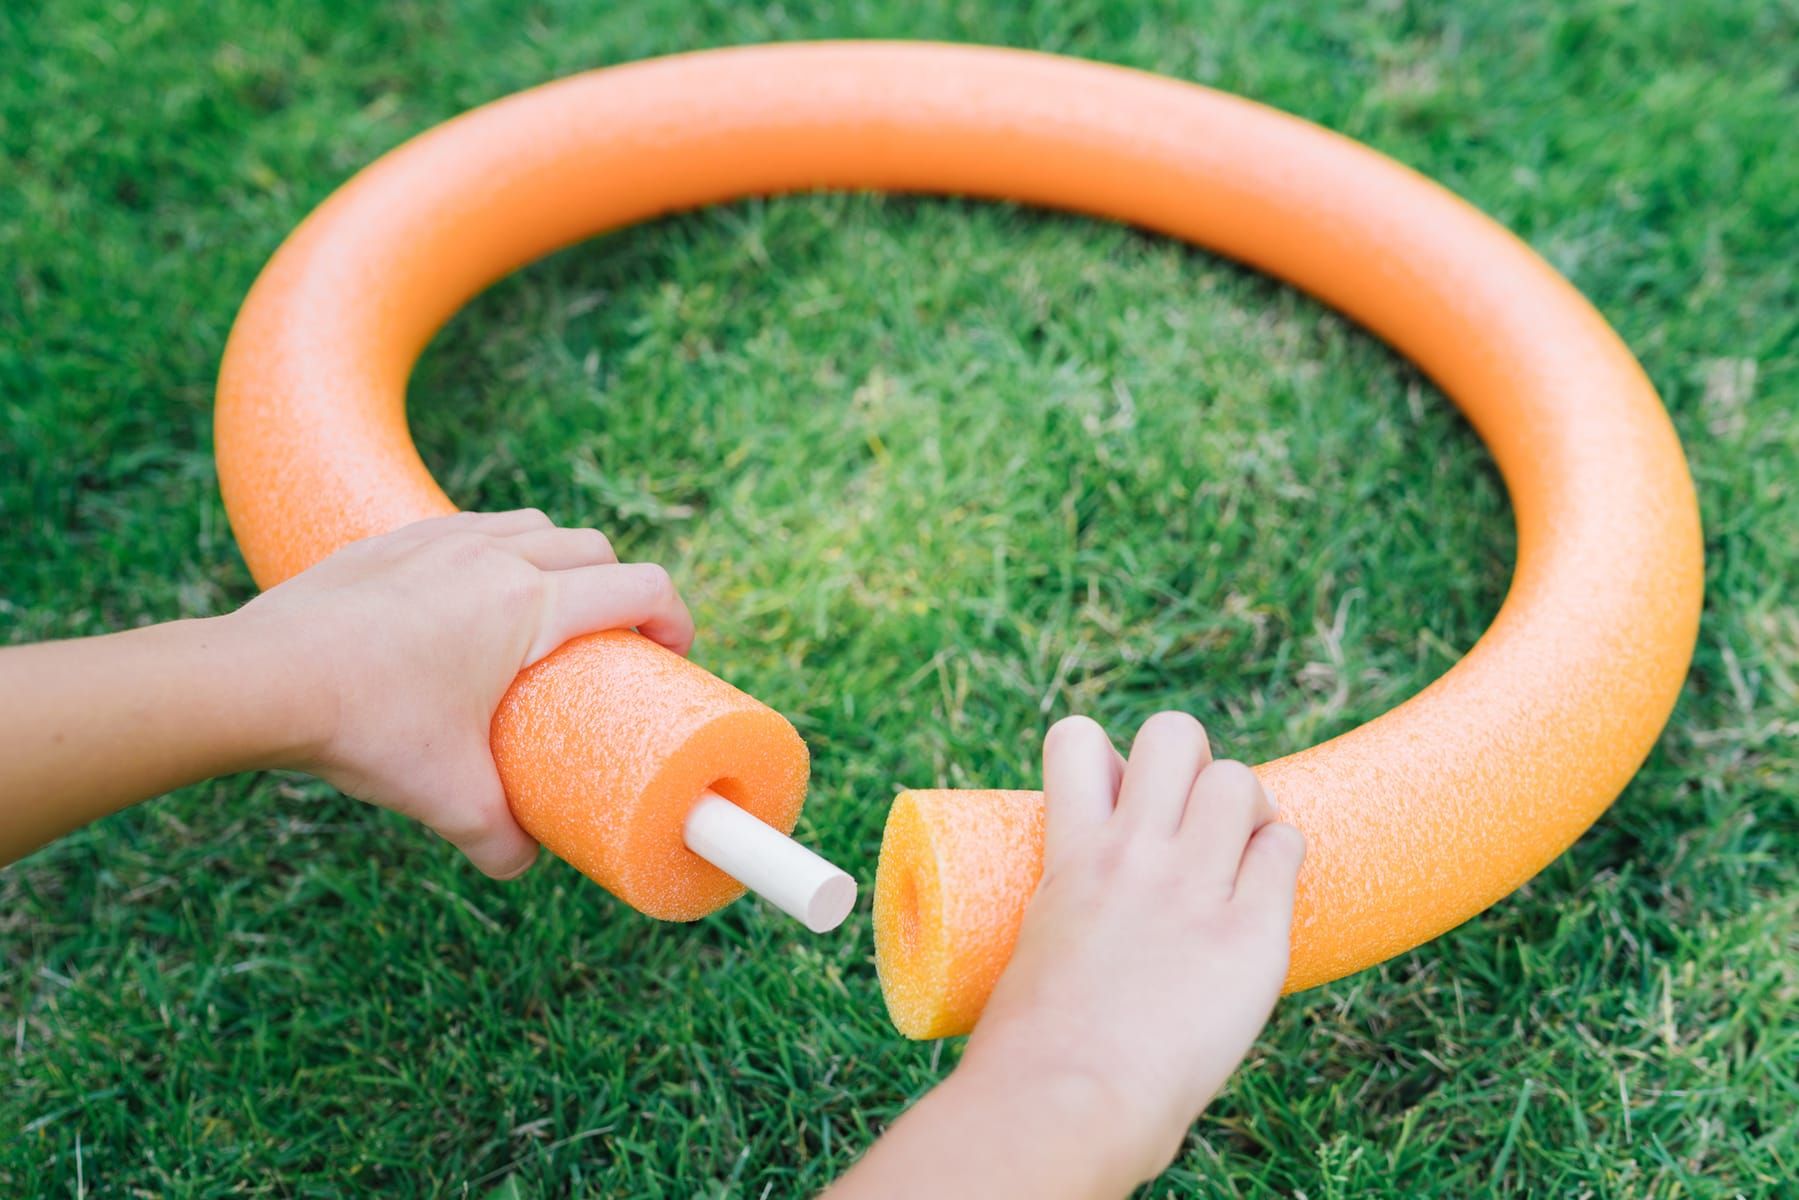 How To Make A Ring Toss Game With A Pool Noodle